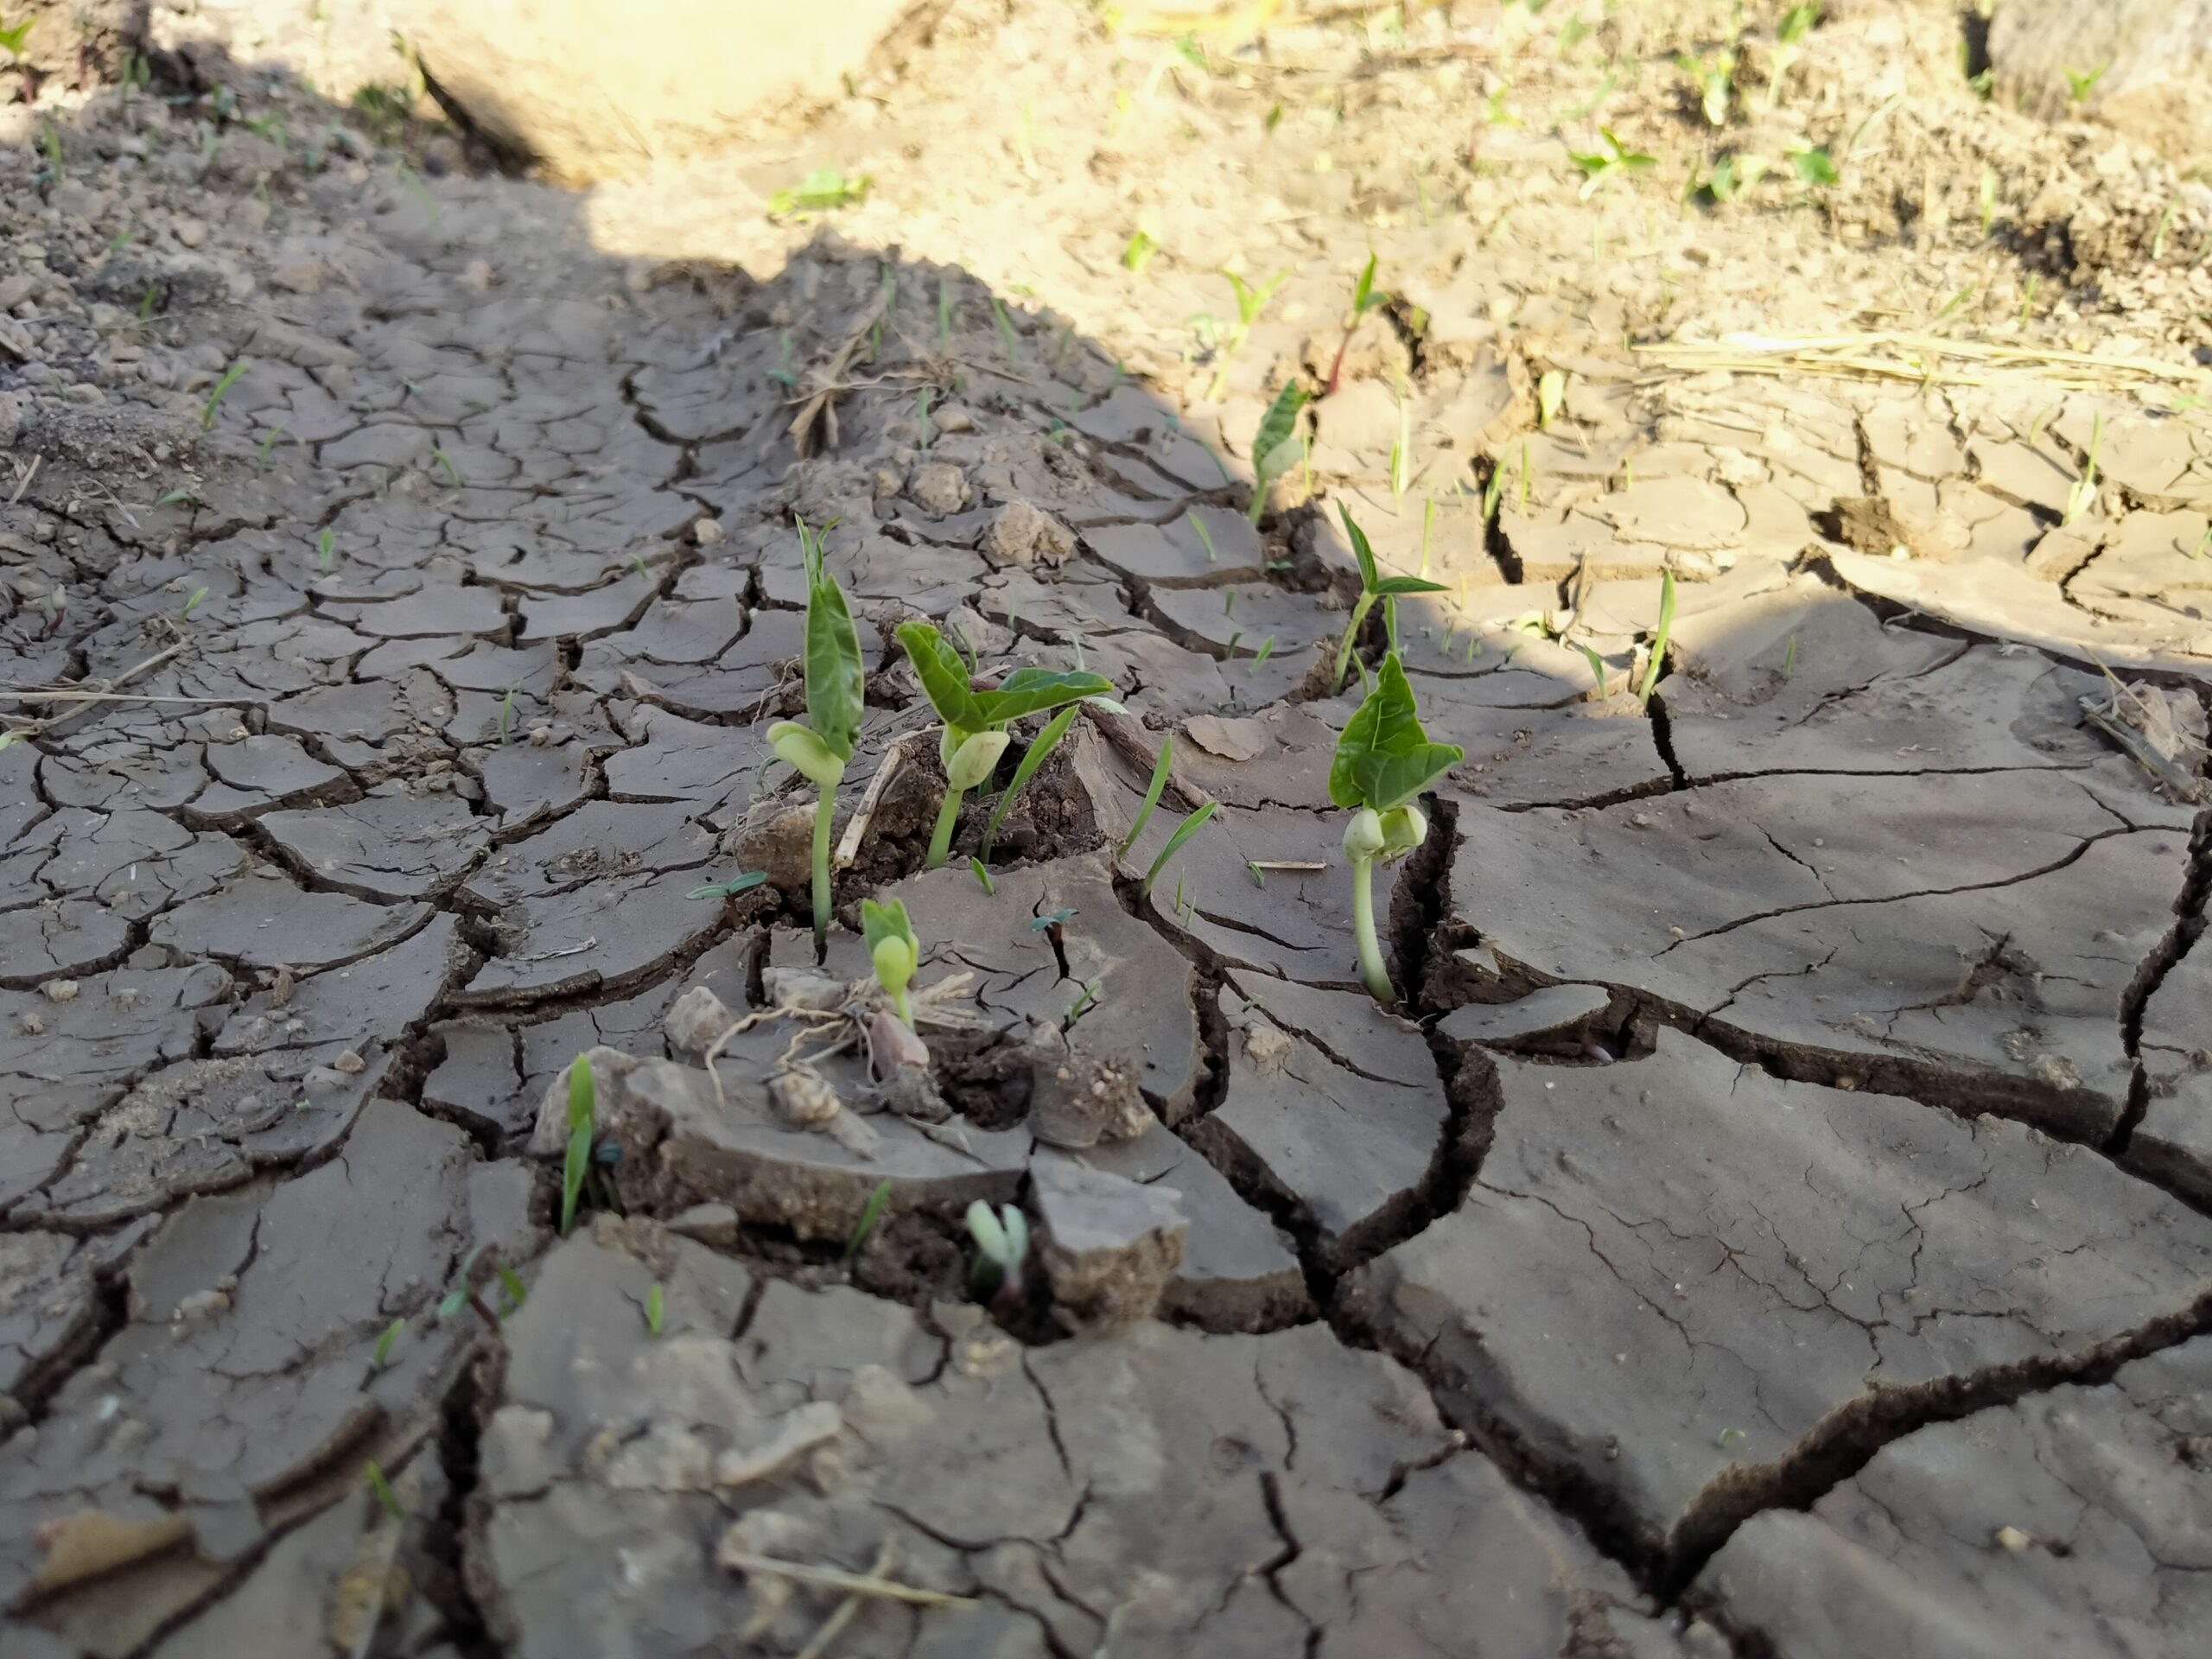 Saplings sprout on dry, degraded land.